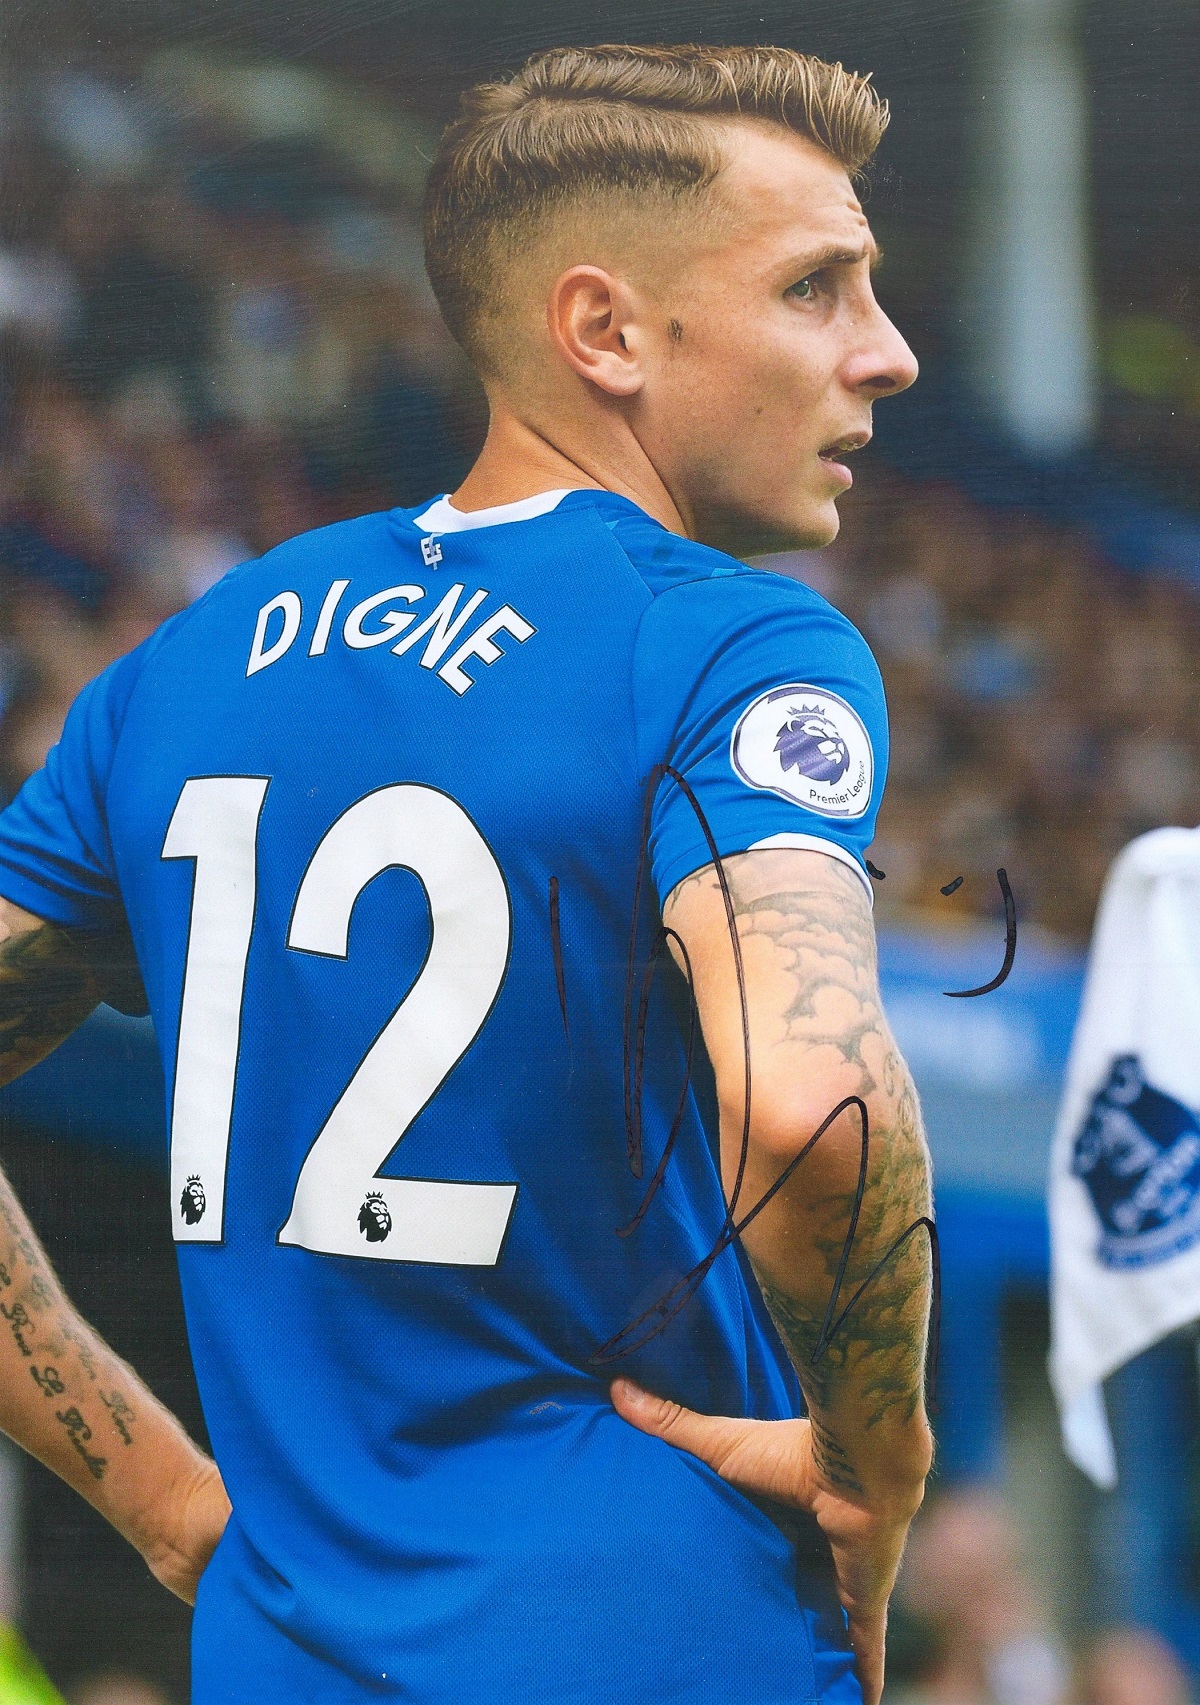 Football Lucas Digne (born 20 July 1993) is a French professional footballer who plays as a left